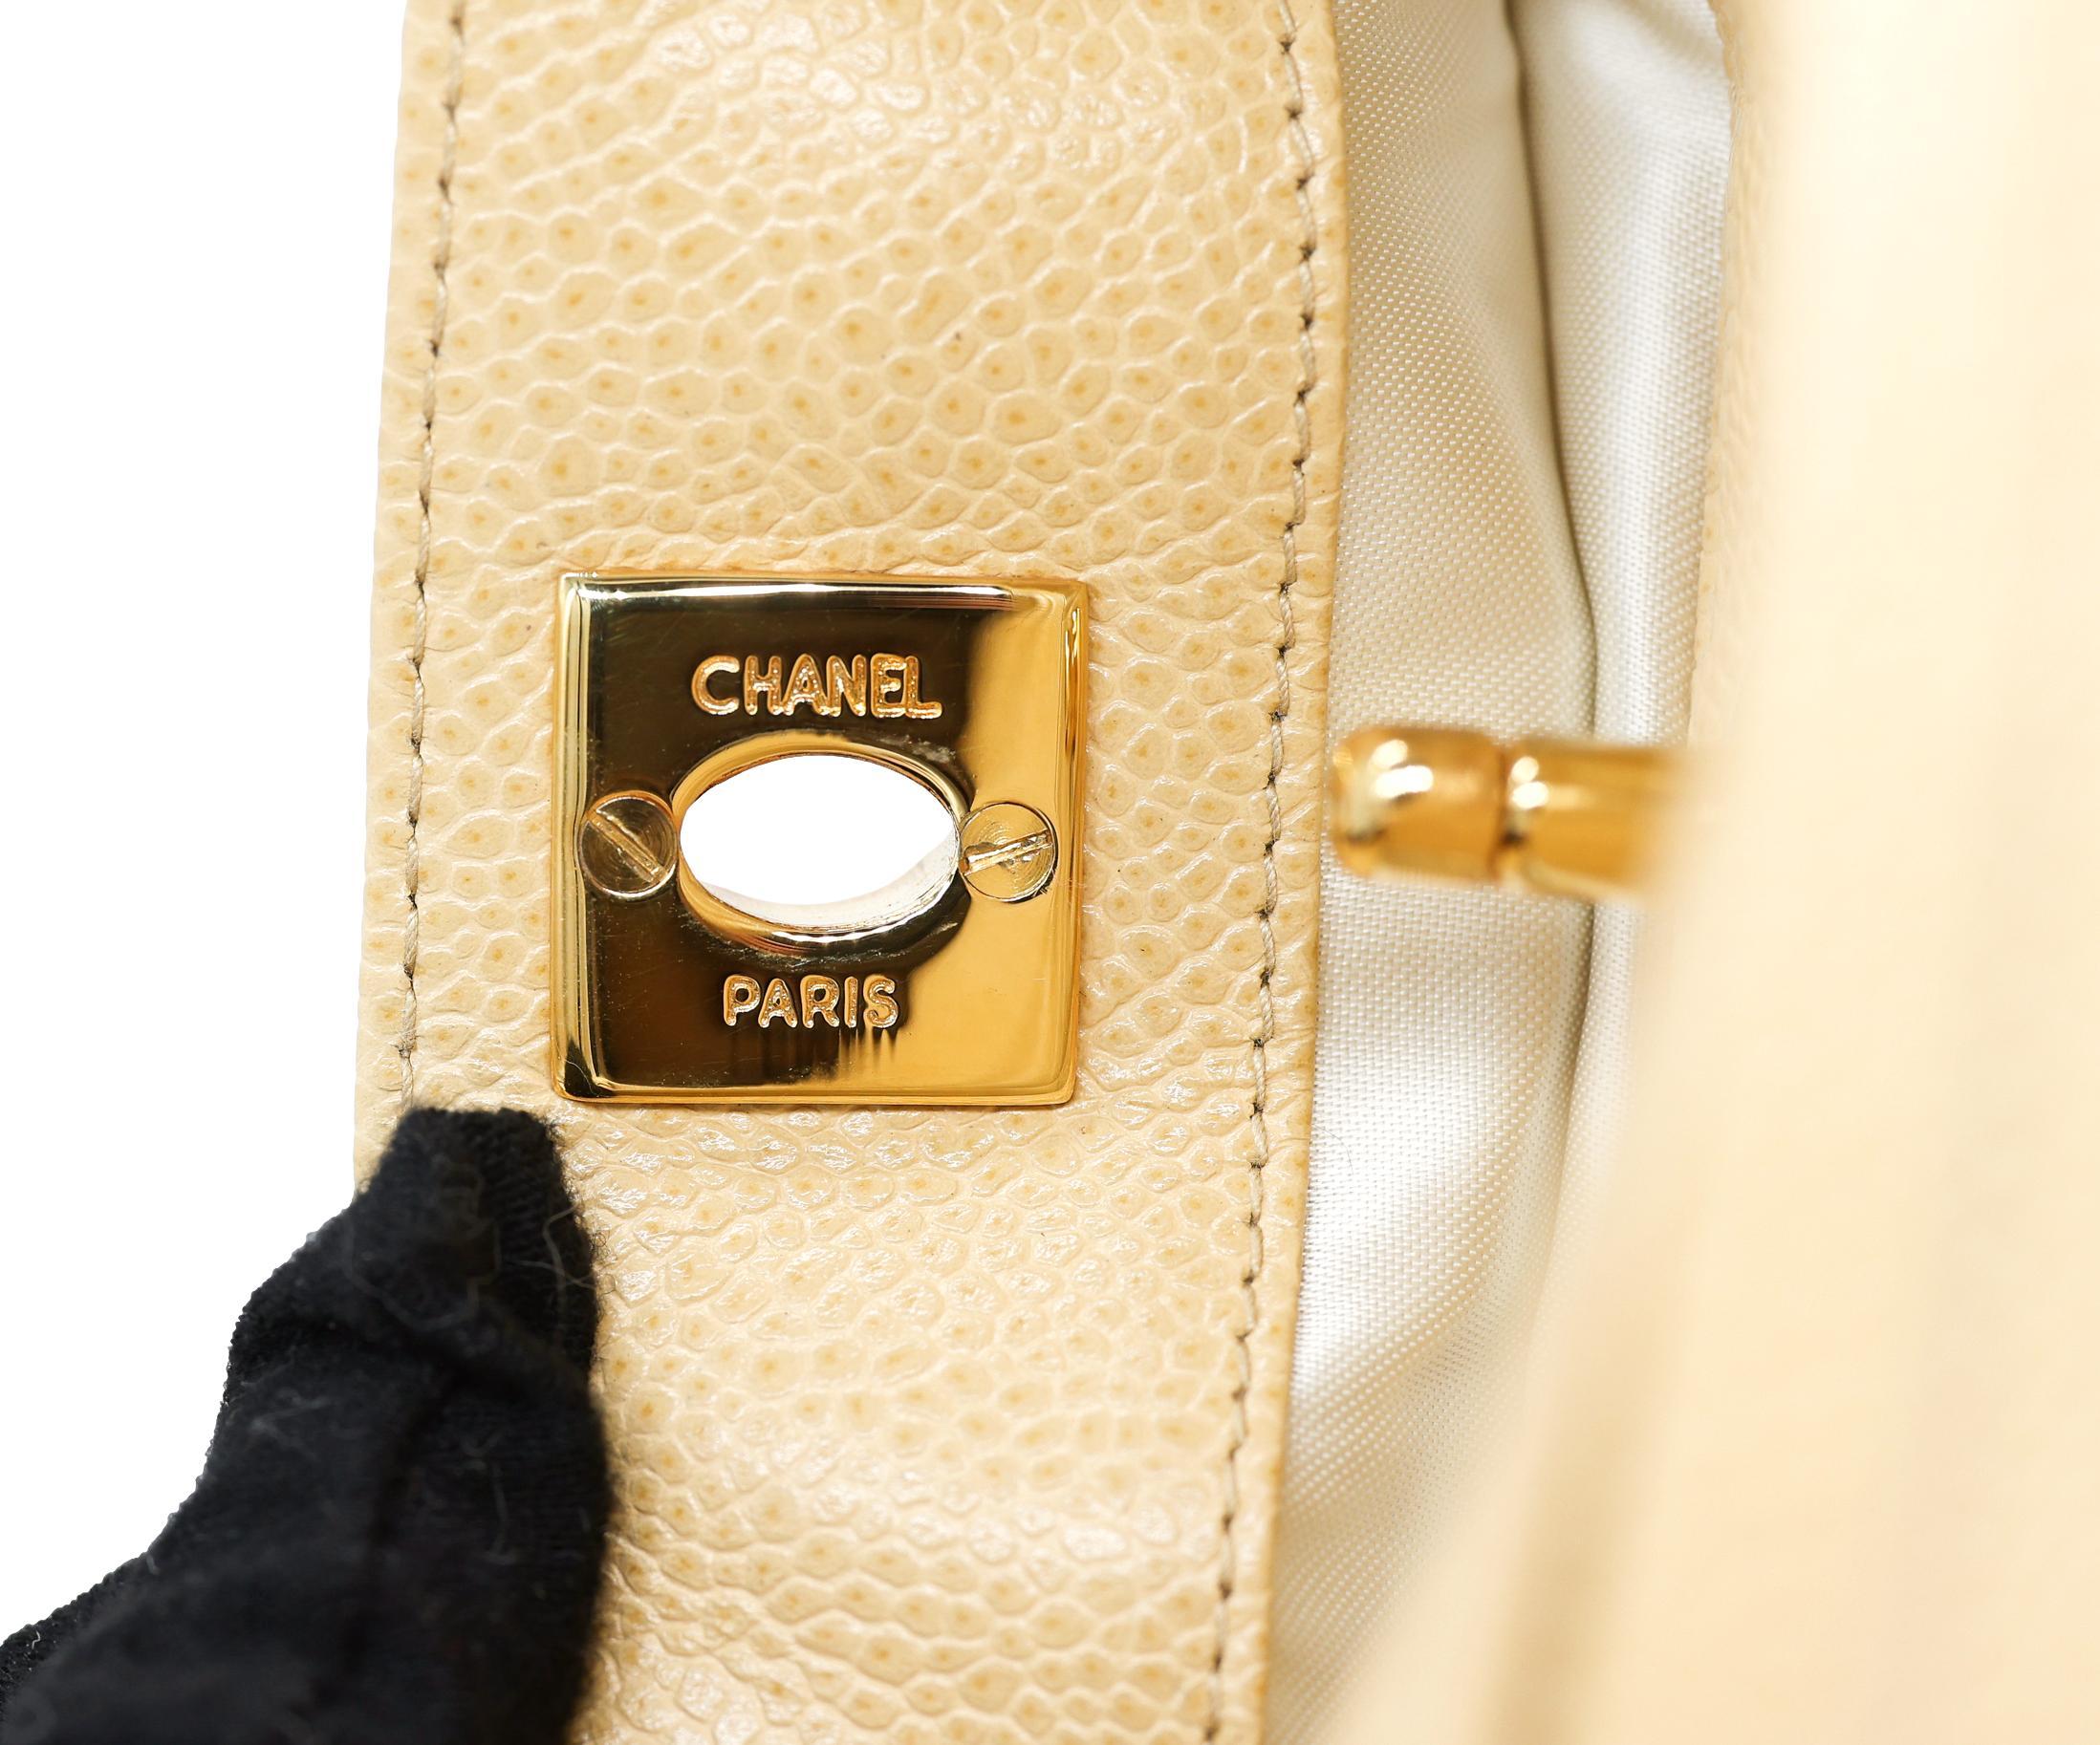 Chanel Vintage Quilted Caviar Leather Camera Bag with Gold Hardware, 1996 - 1997. 11